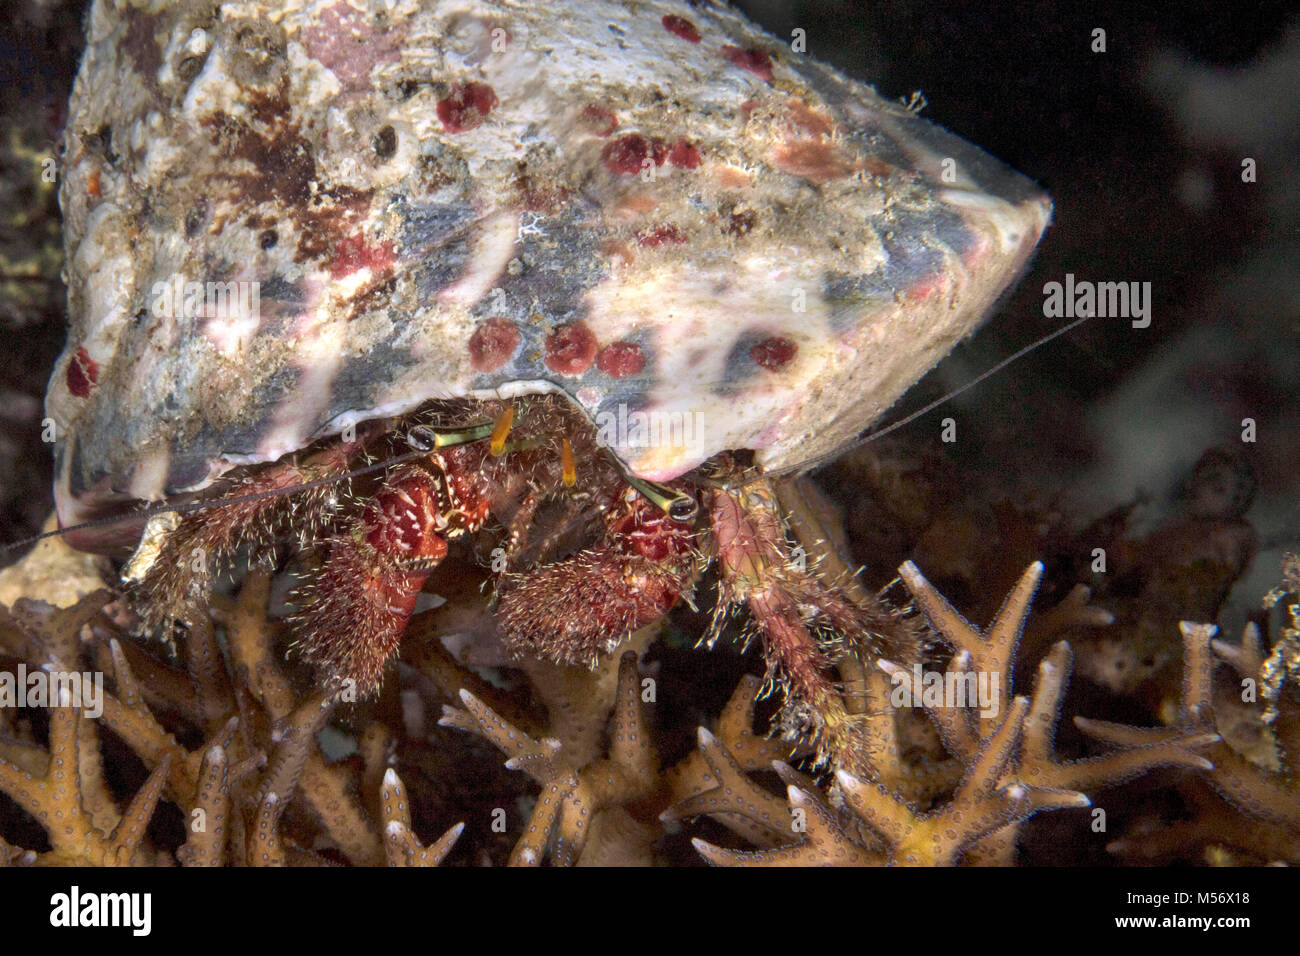 Hermit crab on the coral near Panglao Island, Philippines Stock Photo